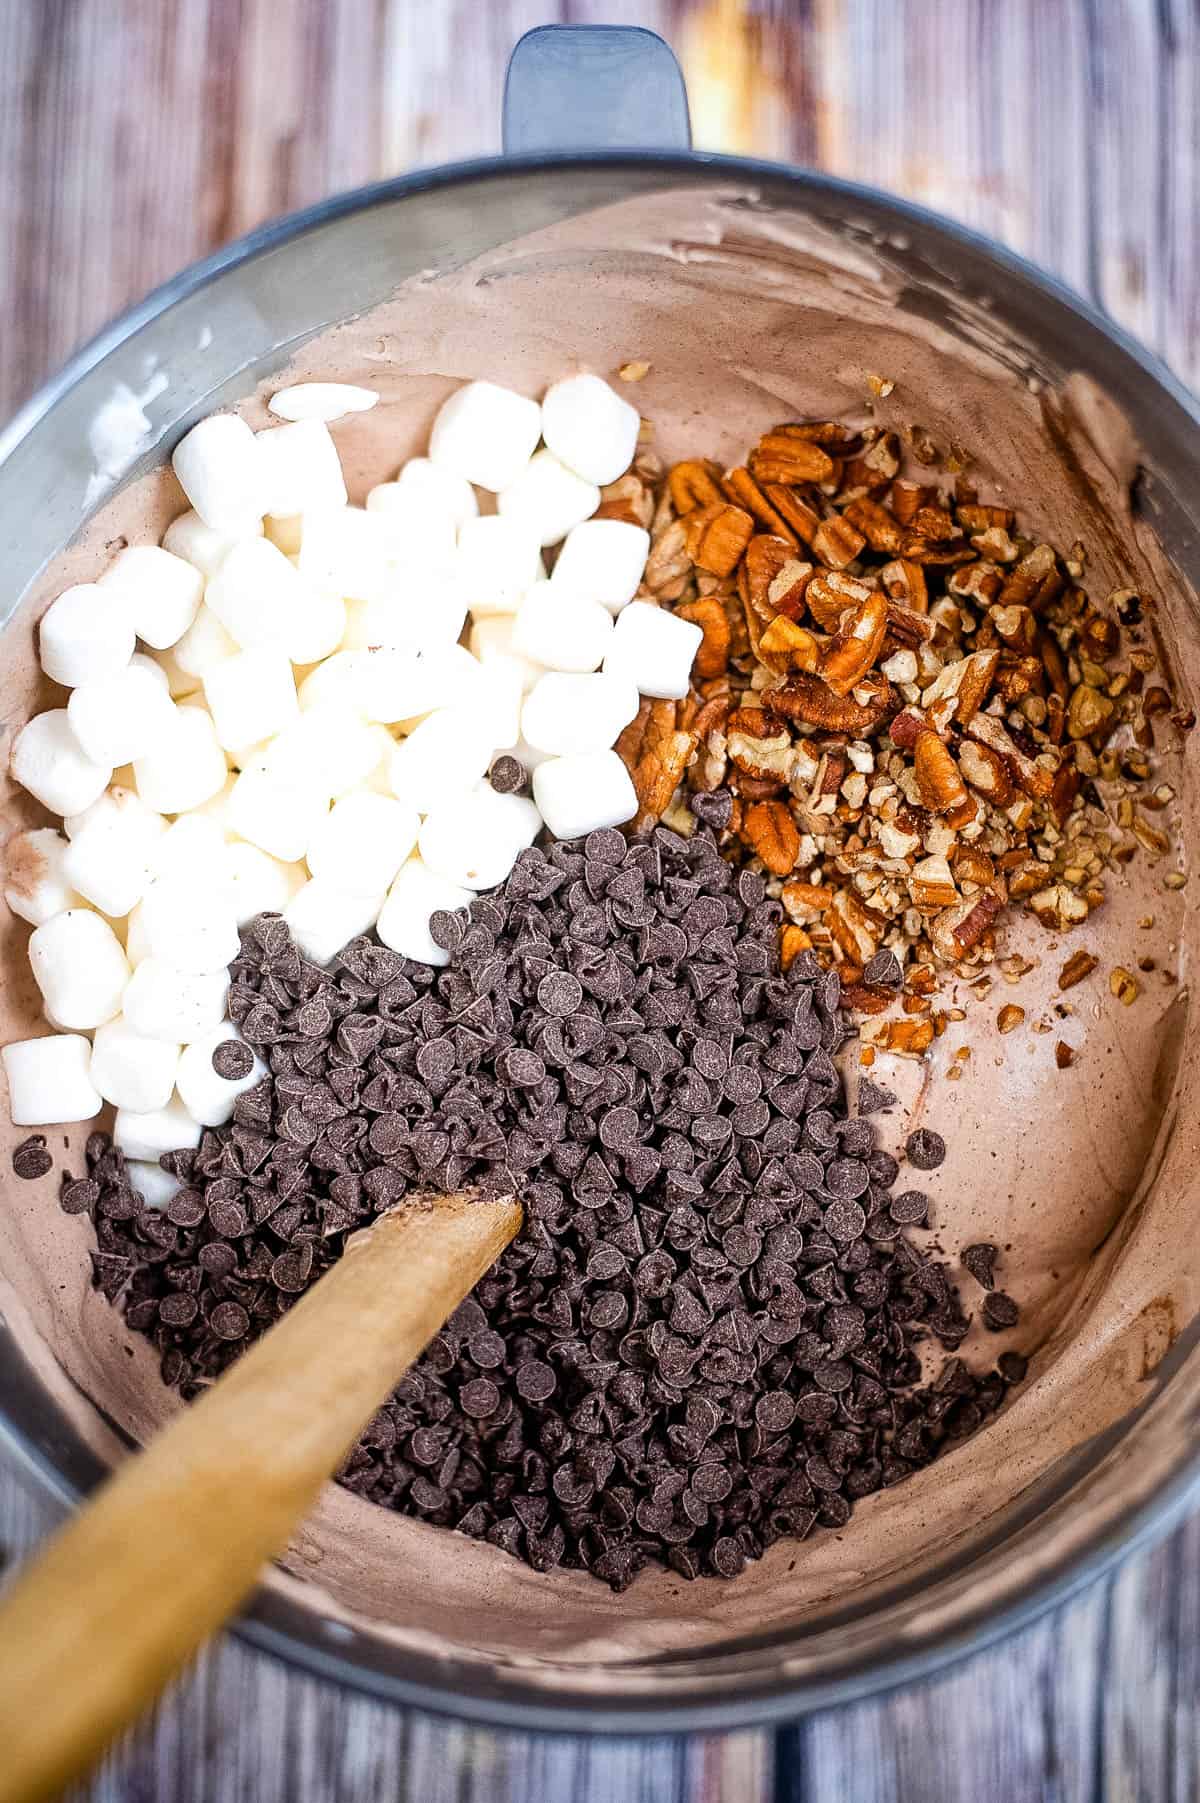 Marshmallows, pecans, and chocolate chips added to the mixture in the bowl.